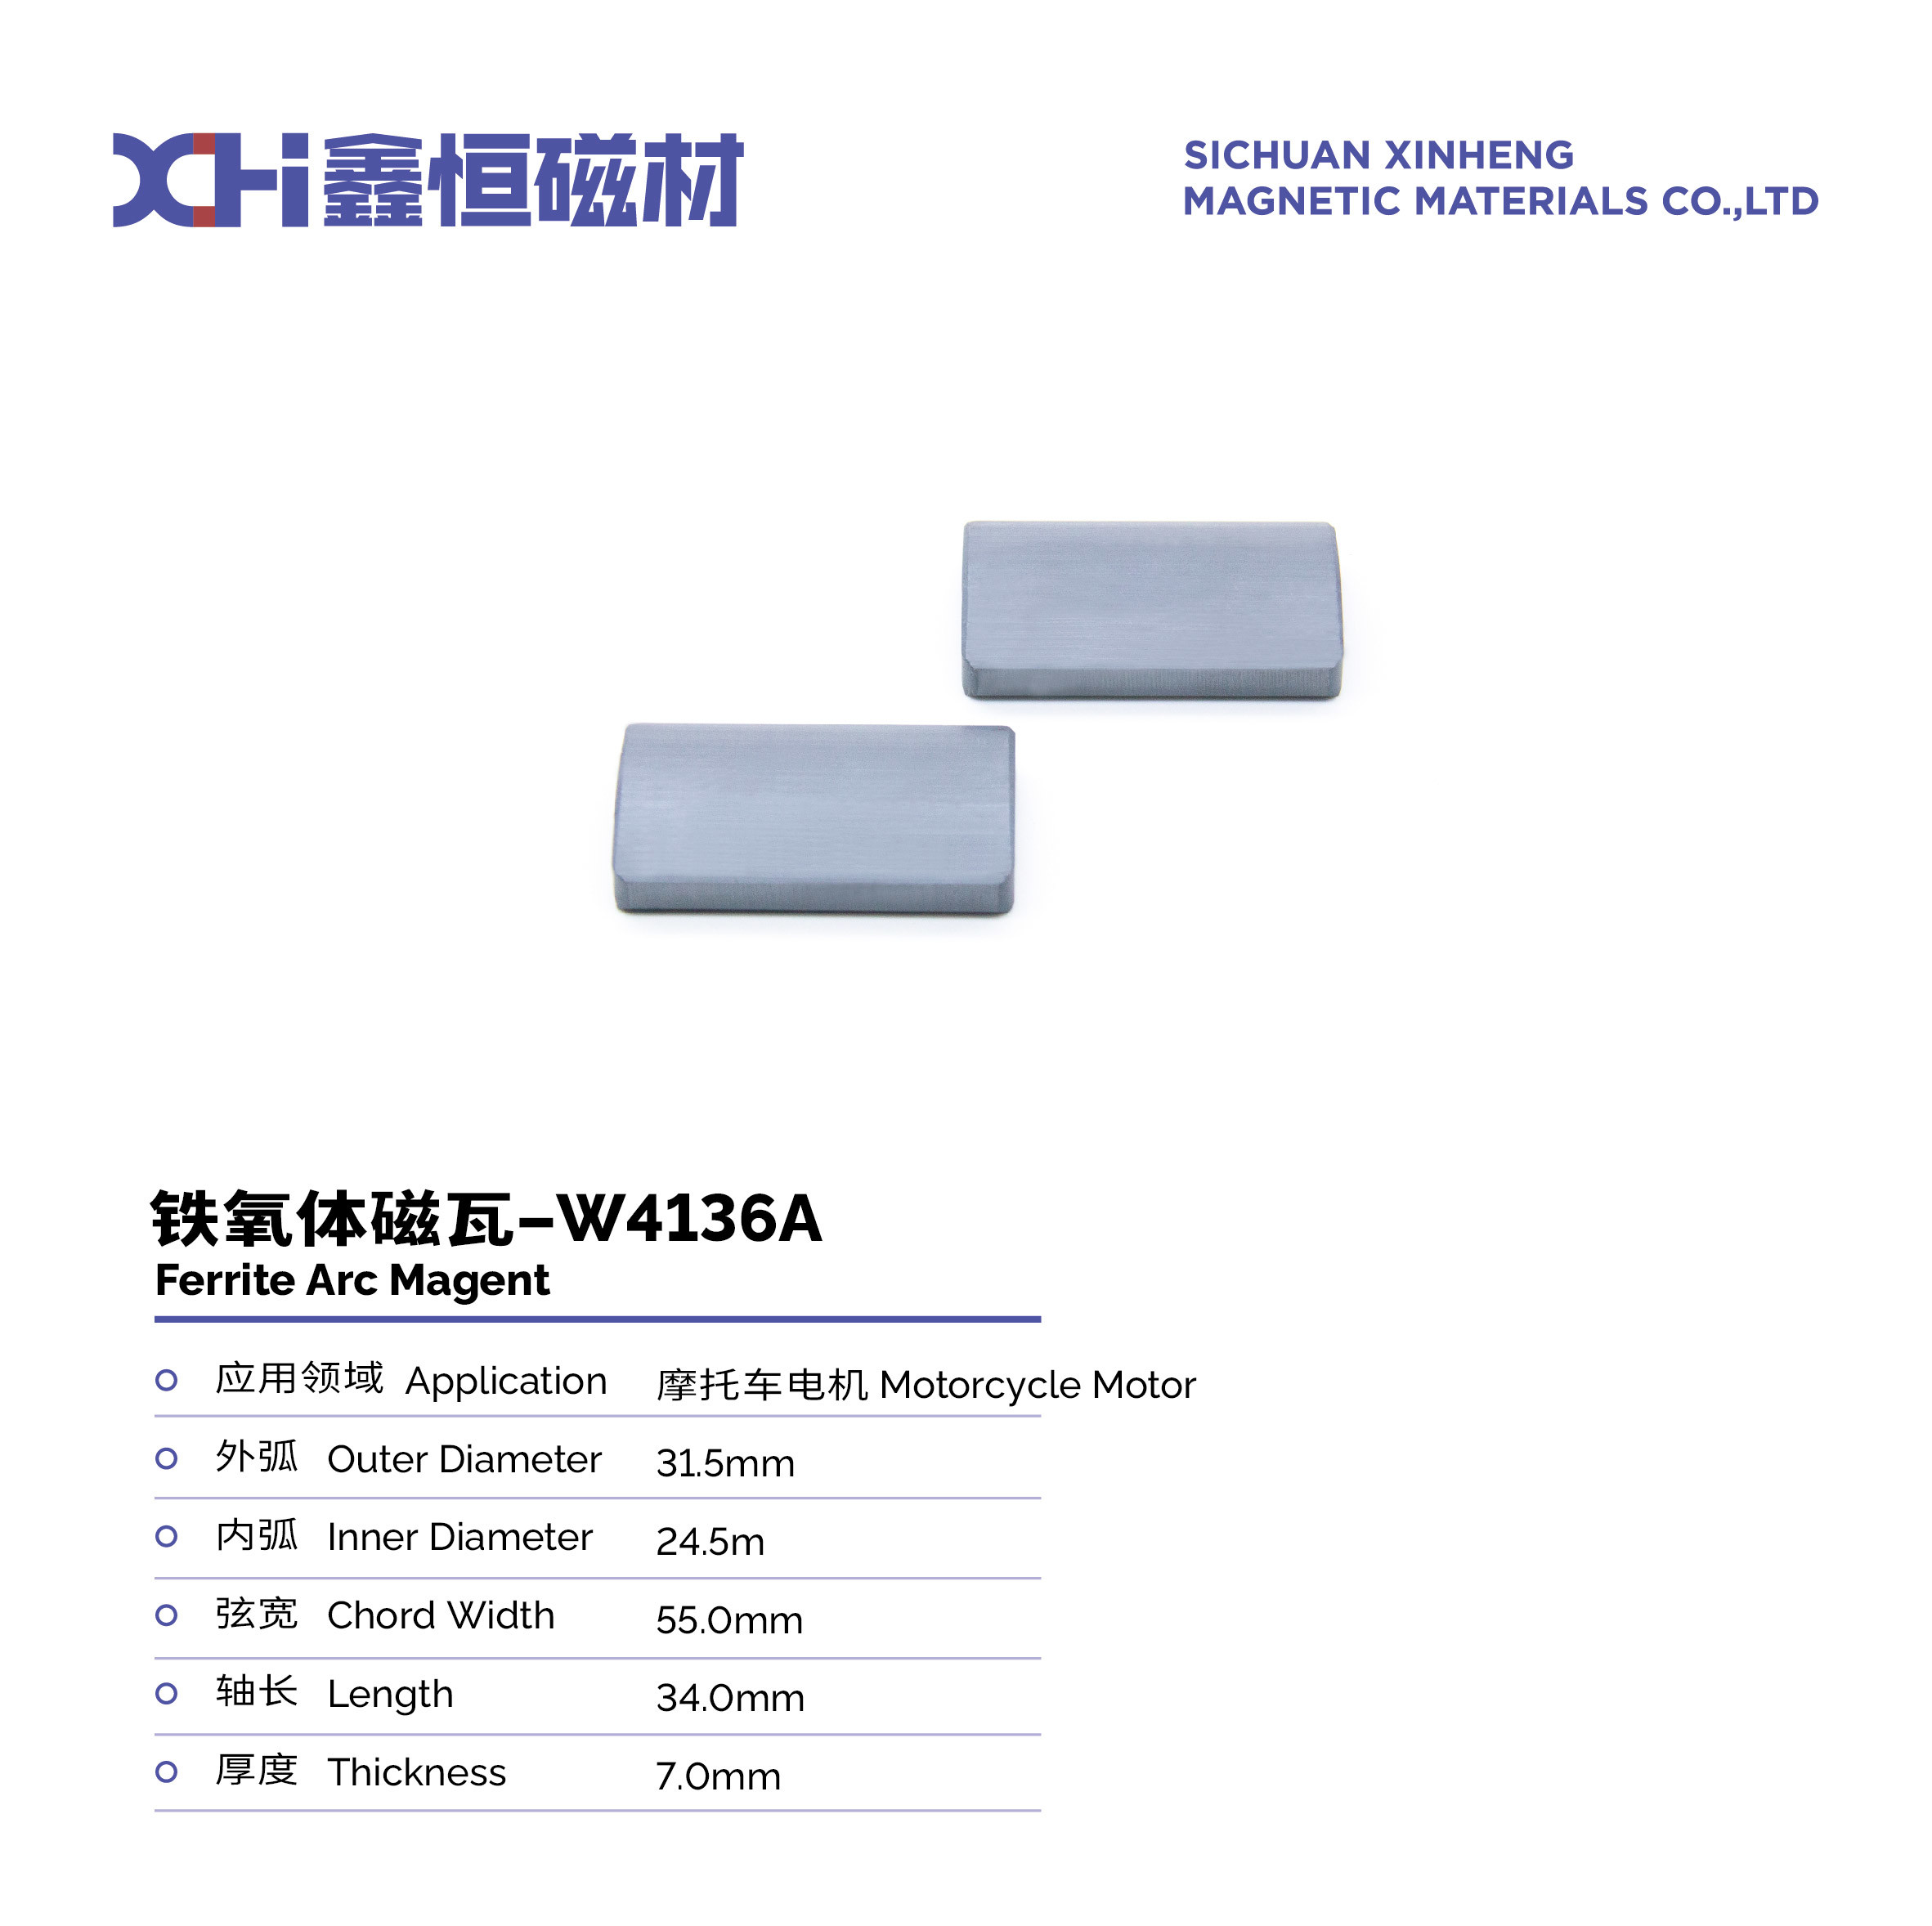 Anisotropic Hard Permanent Magnet Ferrite In Motorcycle Motor W4136A